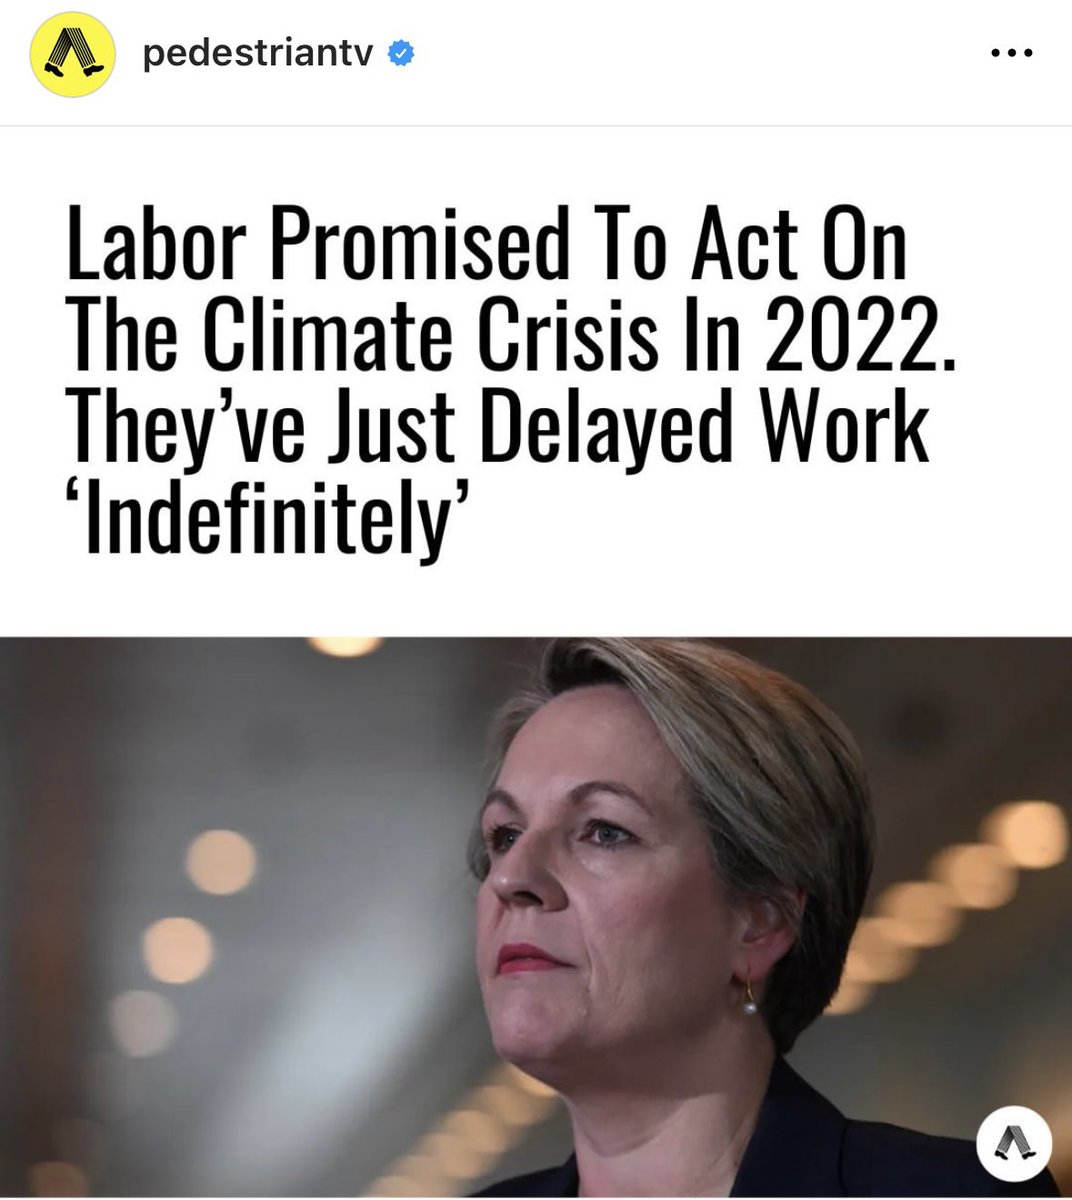 So much for “ending the climate wars”. It’s Labor predictably kowtowing to their fossil sponsors. @tanya_plibersek @AlboMP A bit fat FAIL for you and your fossil simping, spineless government. #ClimateEmergency #StateCapture pedestrian.tv/news/labor-del…